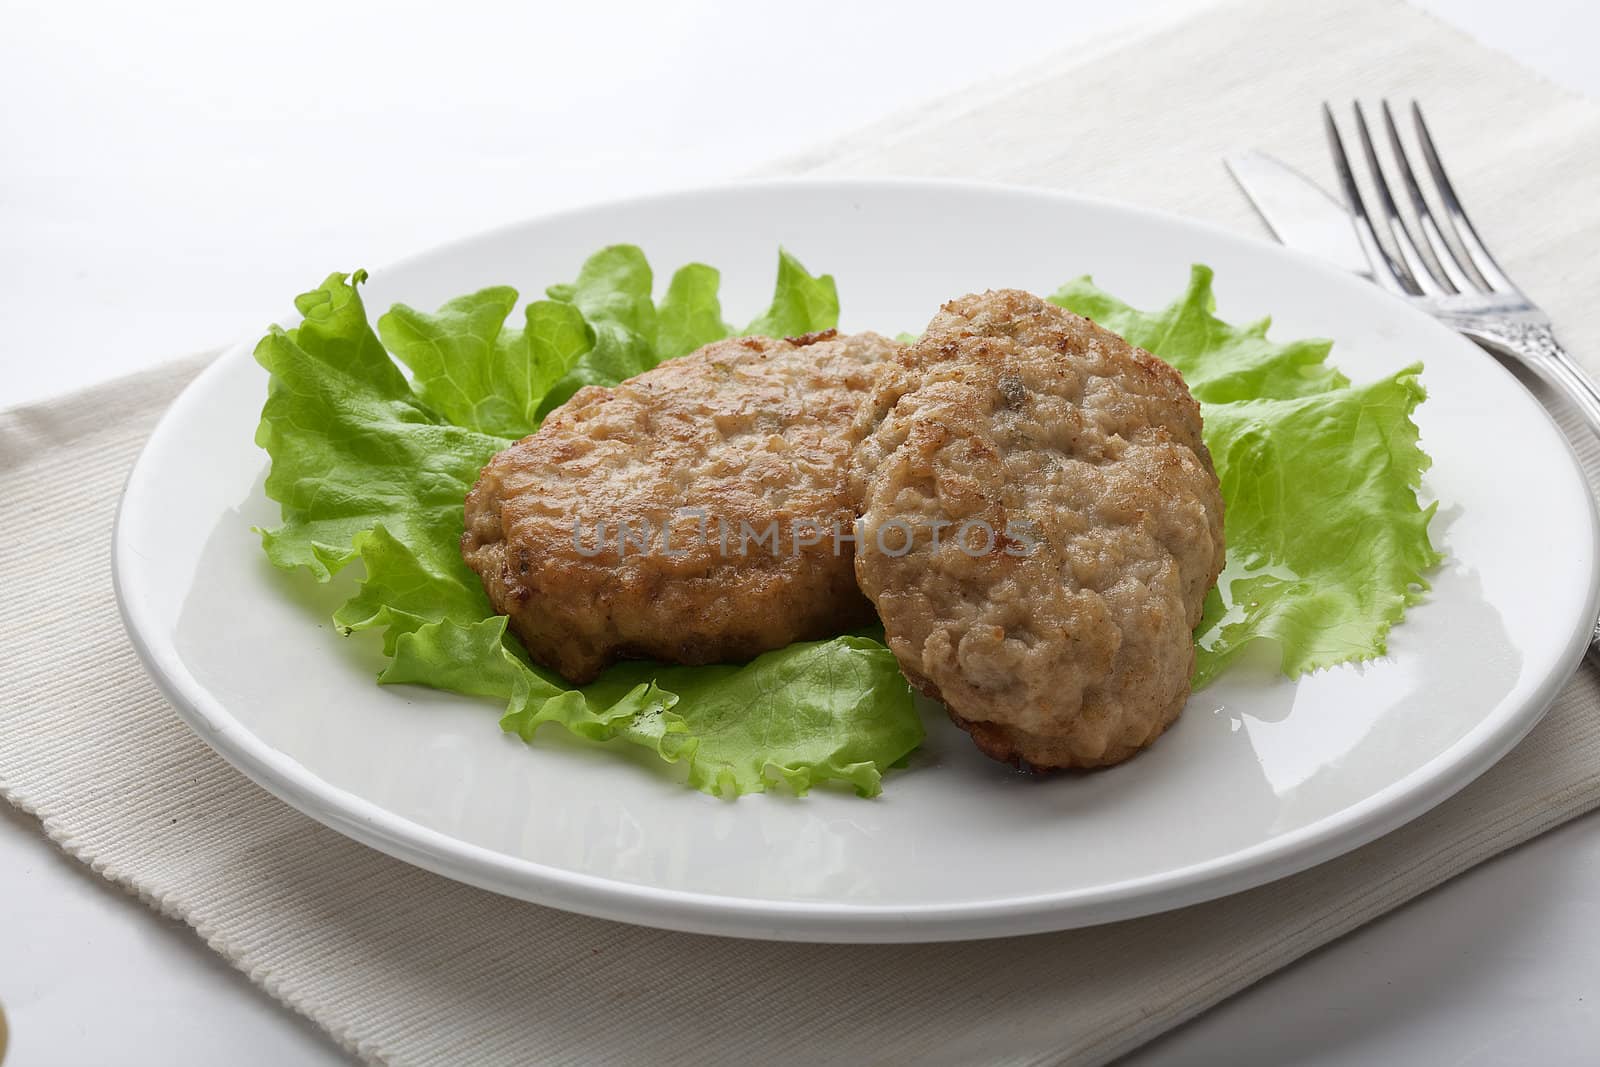 White plate with two rissoles and lettuce on the napkin with fork